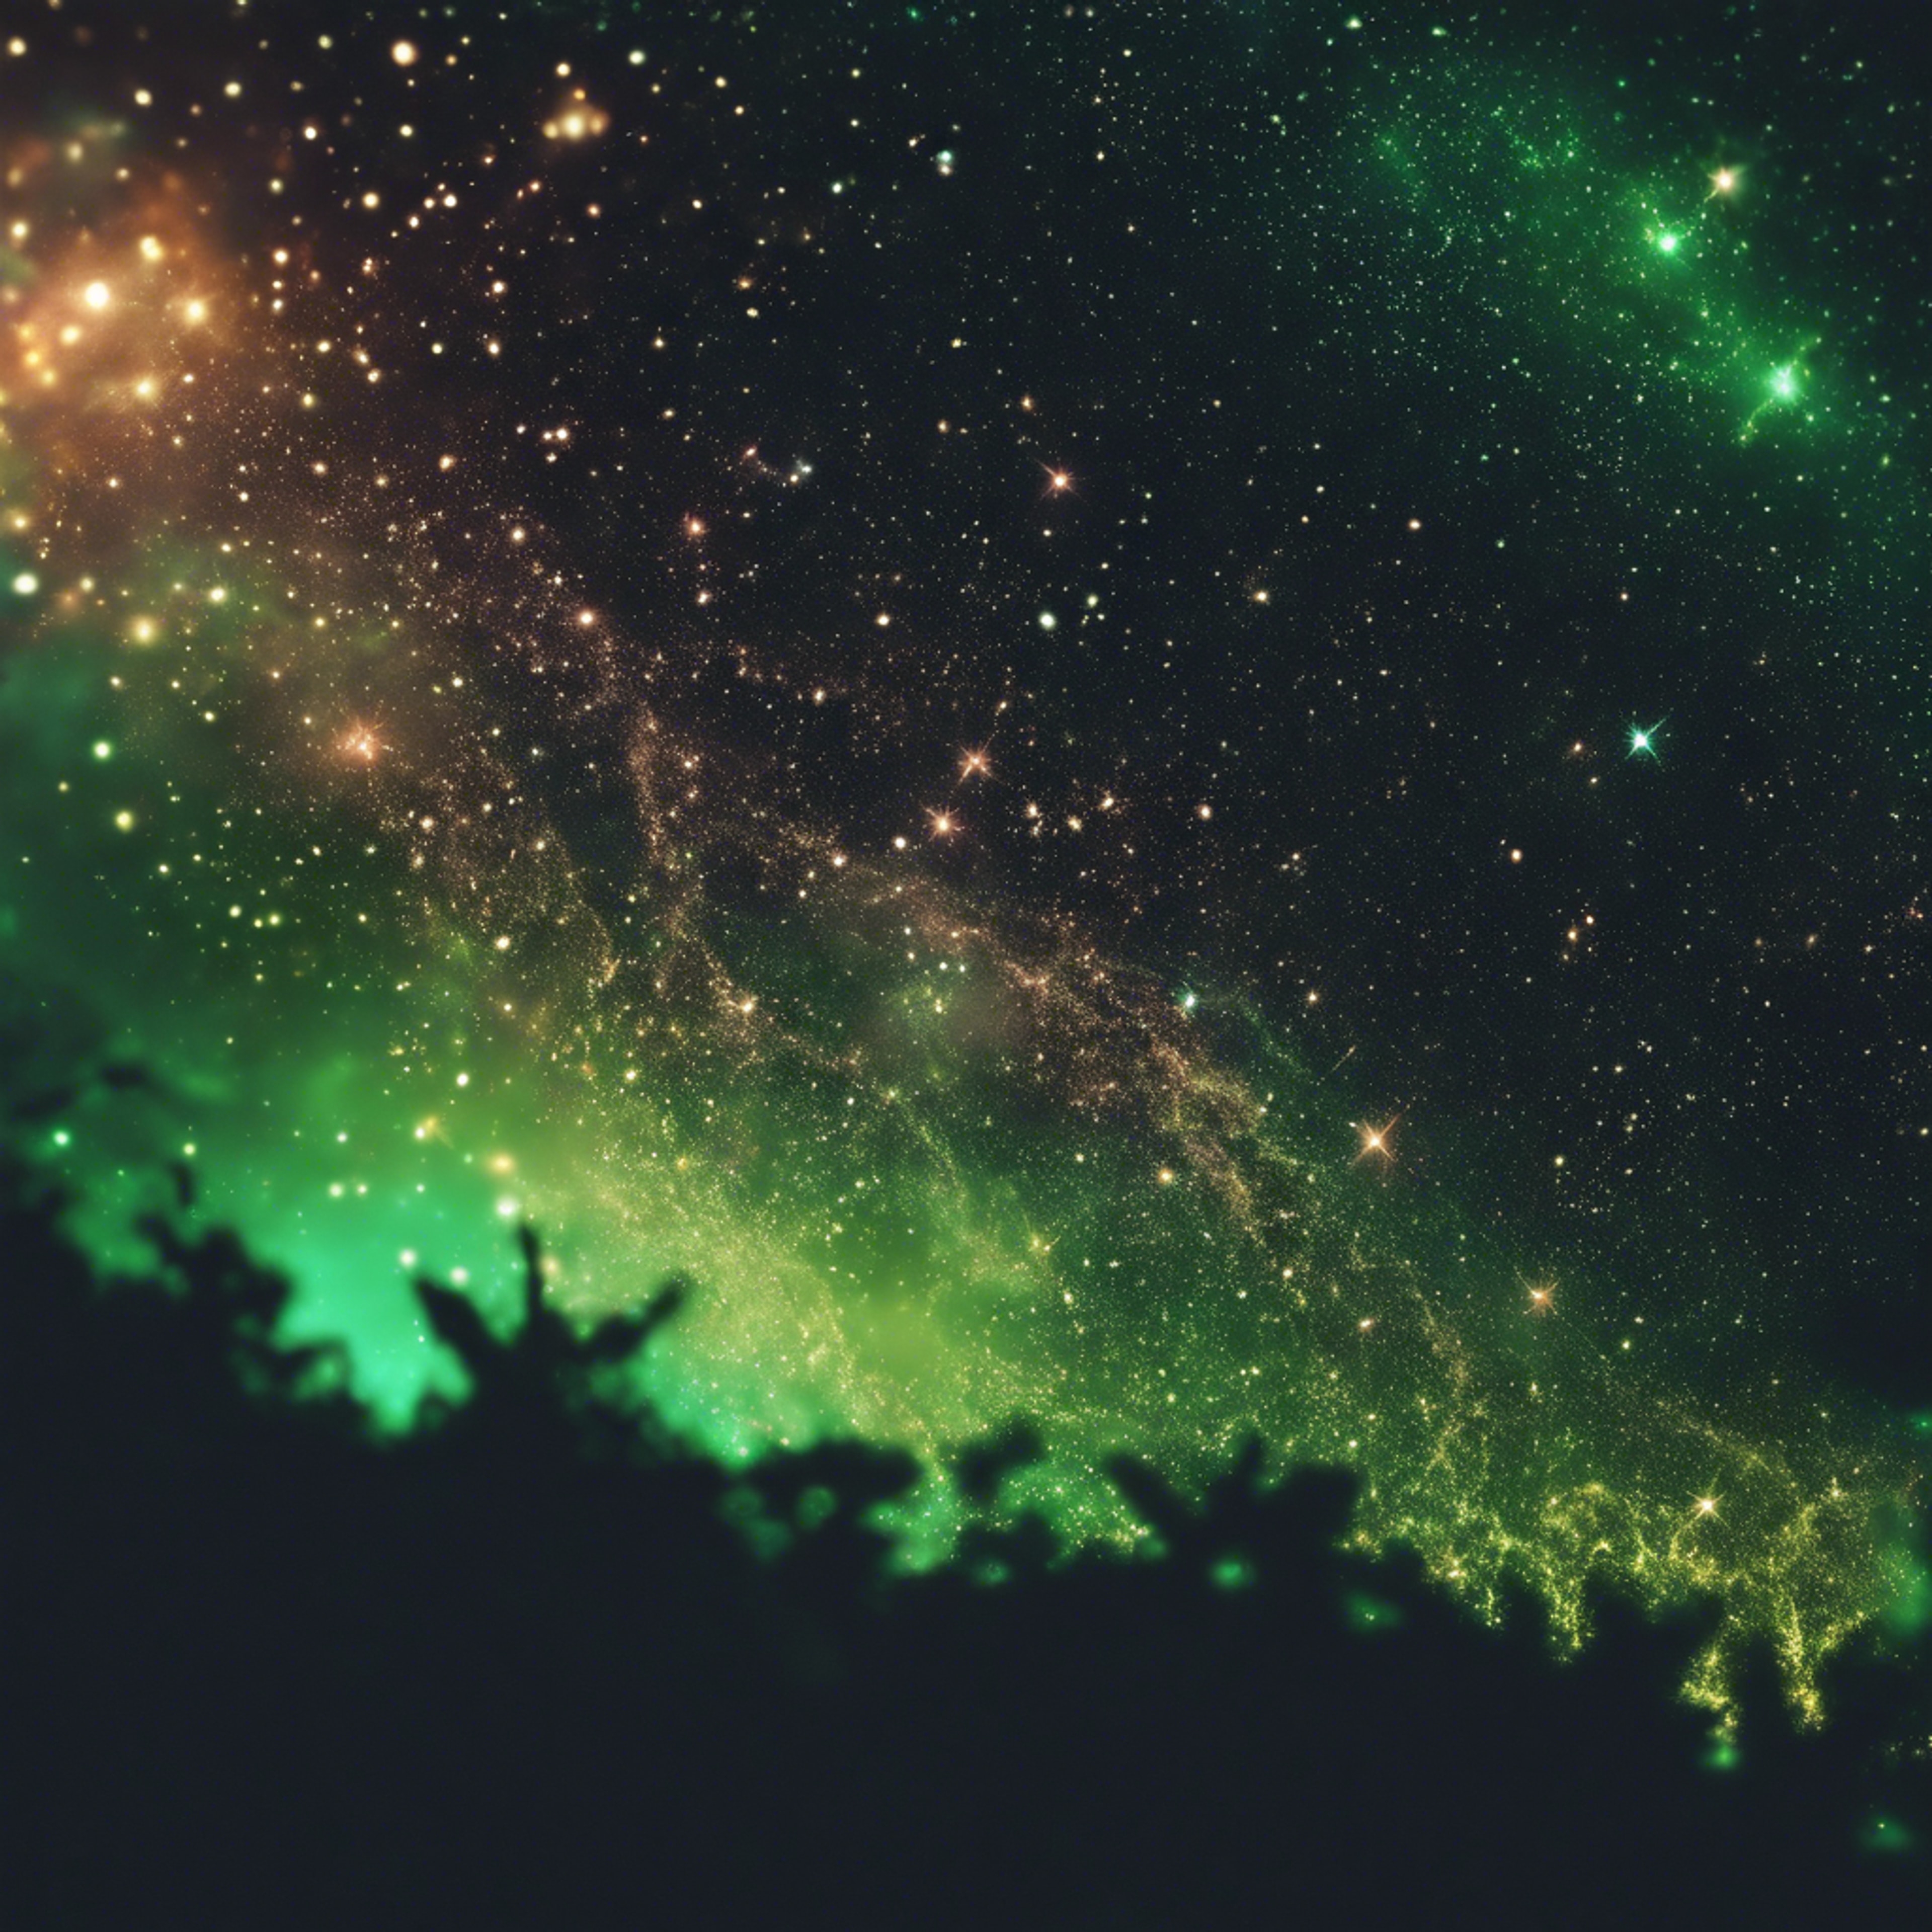 A galaxy seen from the edge of the universe, with cool neon green stars sparking in the darkness. Wallpaper[23da465cd95e430a971e]